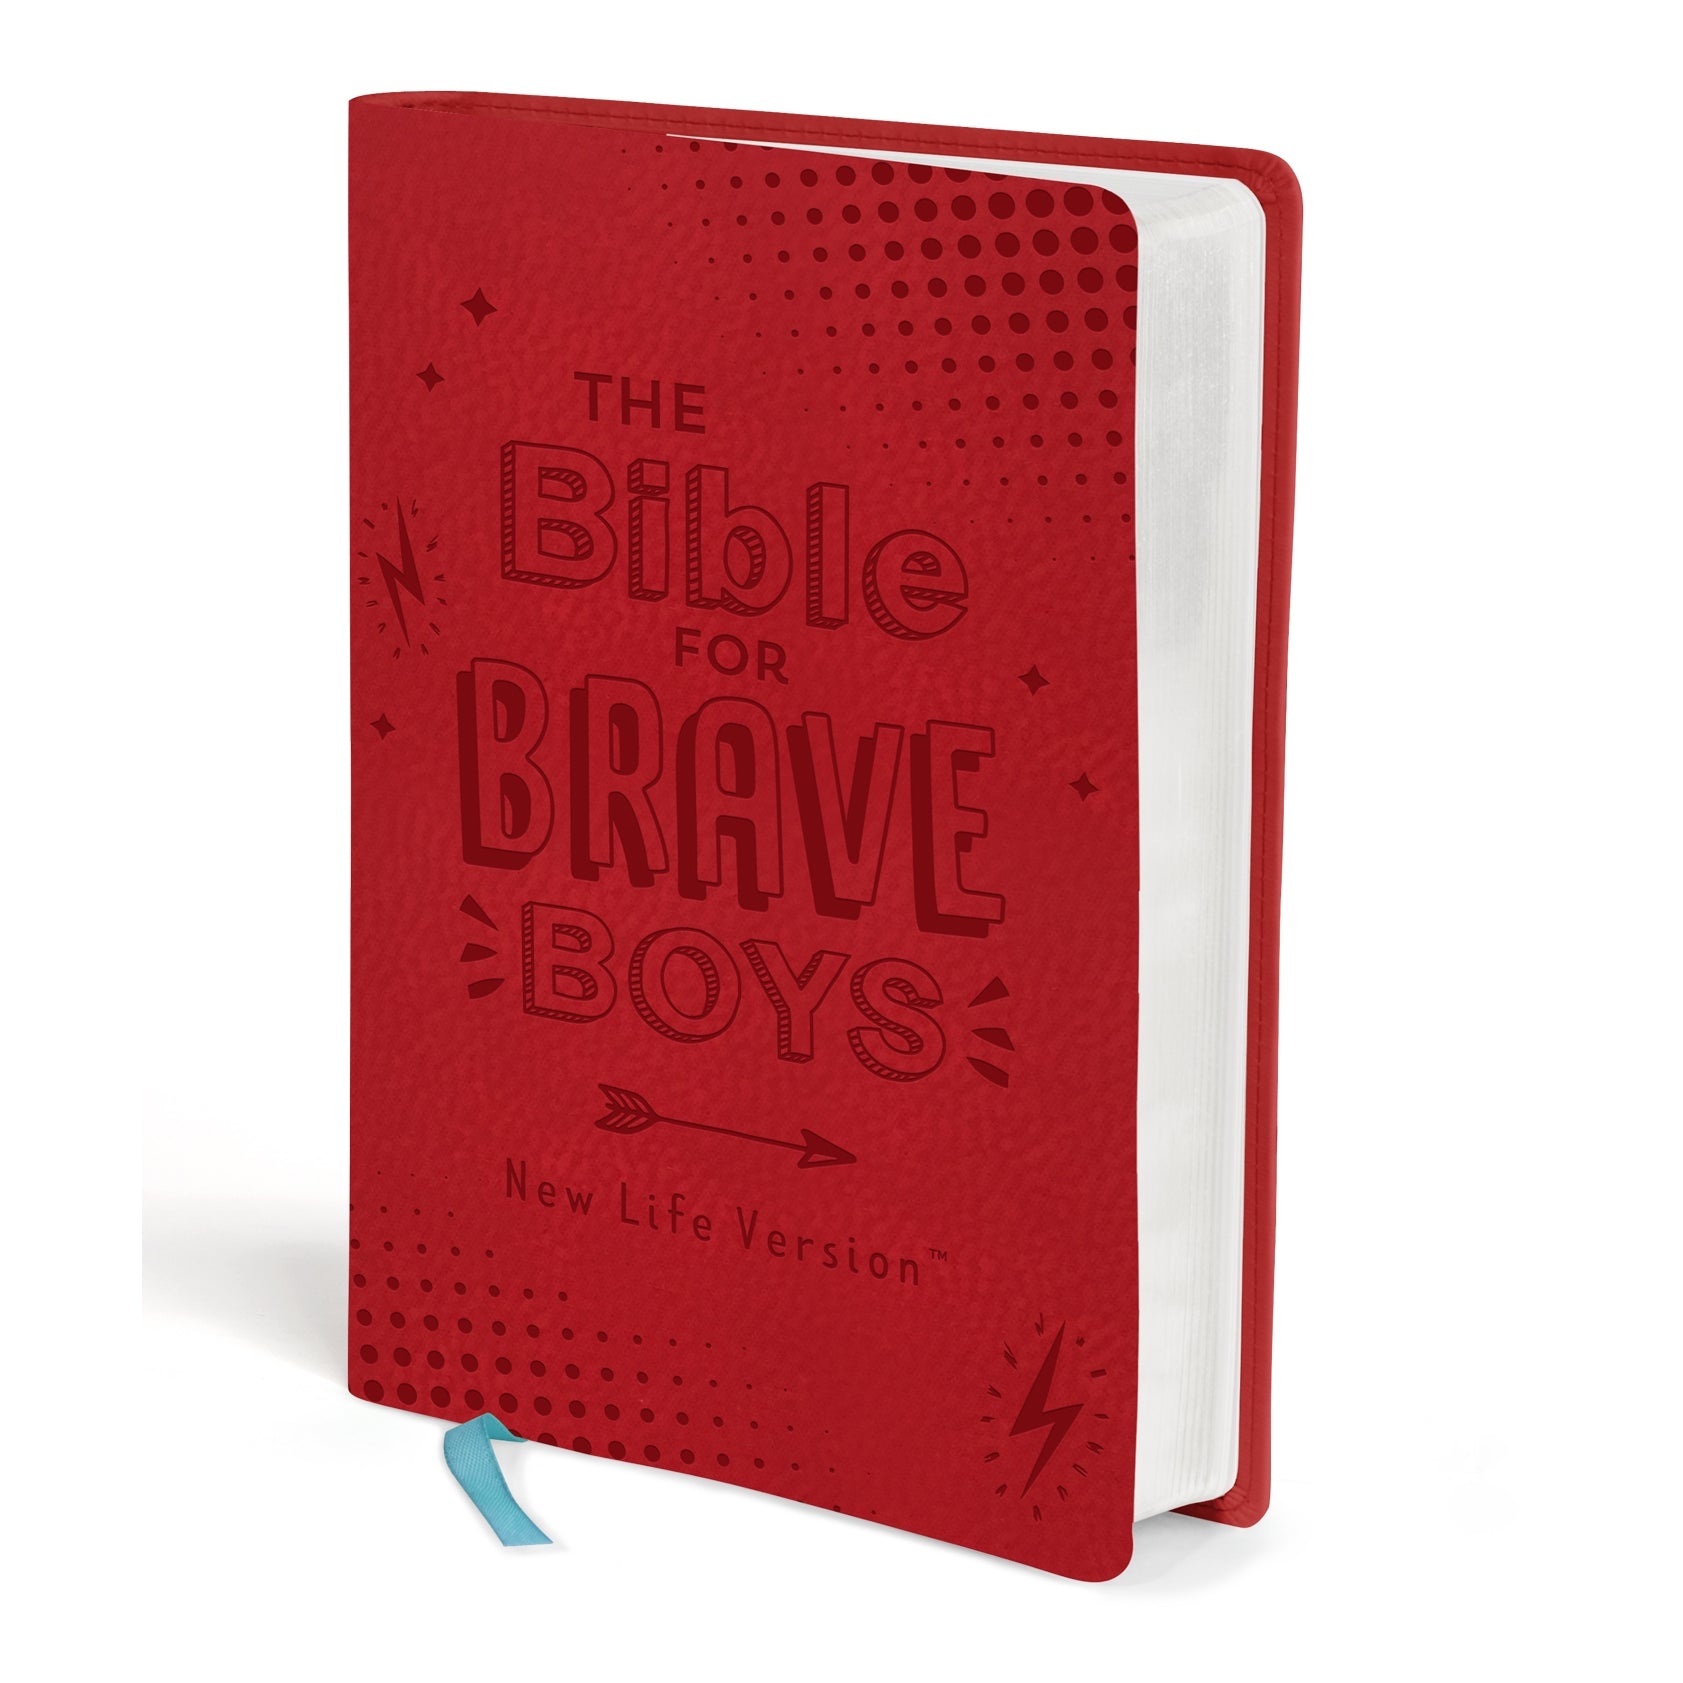 'The Bible for Brave Boys: New Life Version'